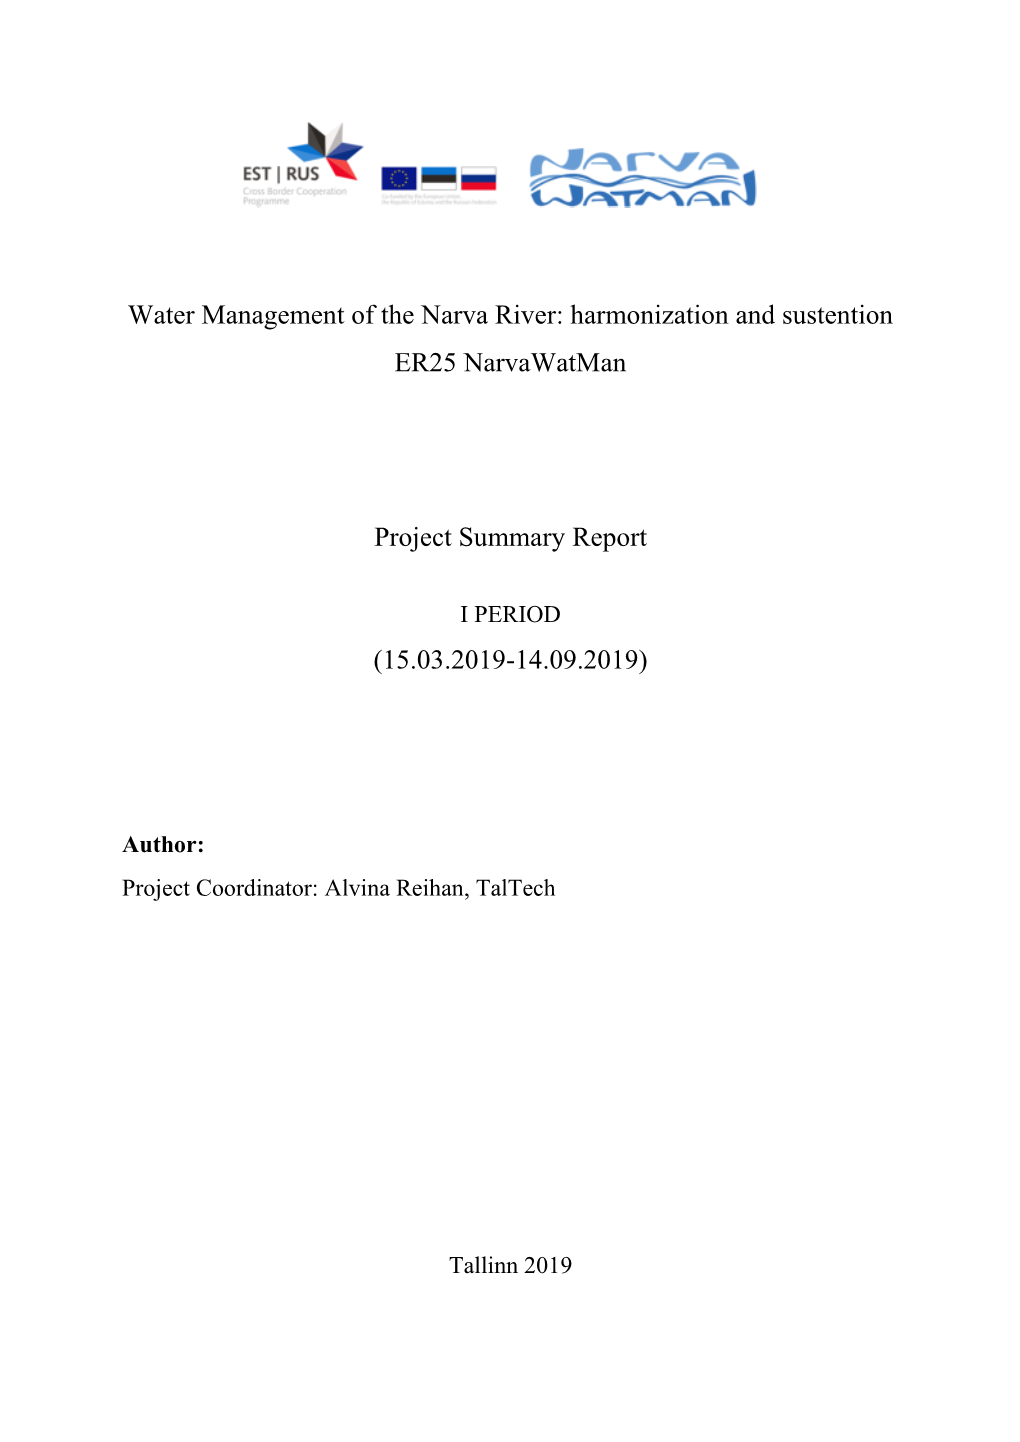 Water Management of the Narva River: Harmonization and Sustention ER25 Narvawatman